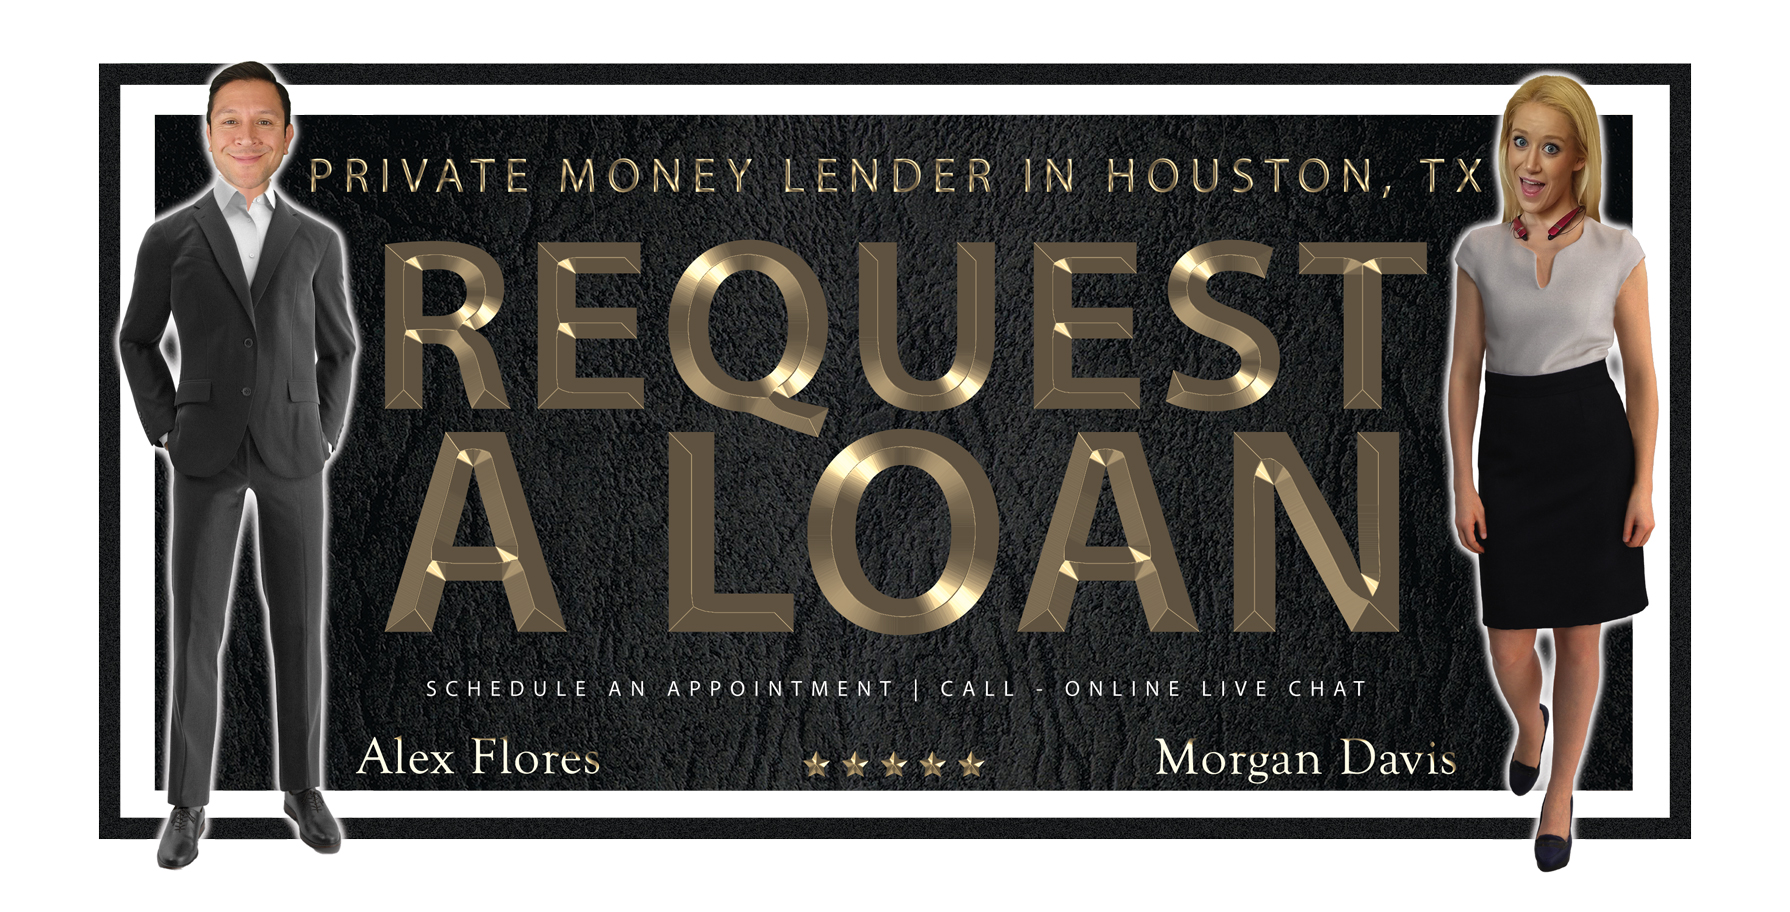 Request-A-Loan-from-Private-Money-Lender-Lux-Loans-in-Housotn-Texas